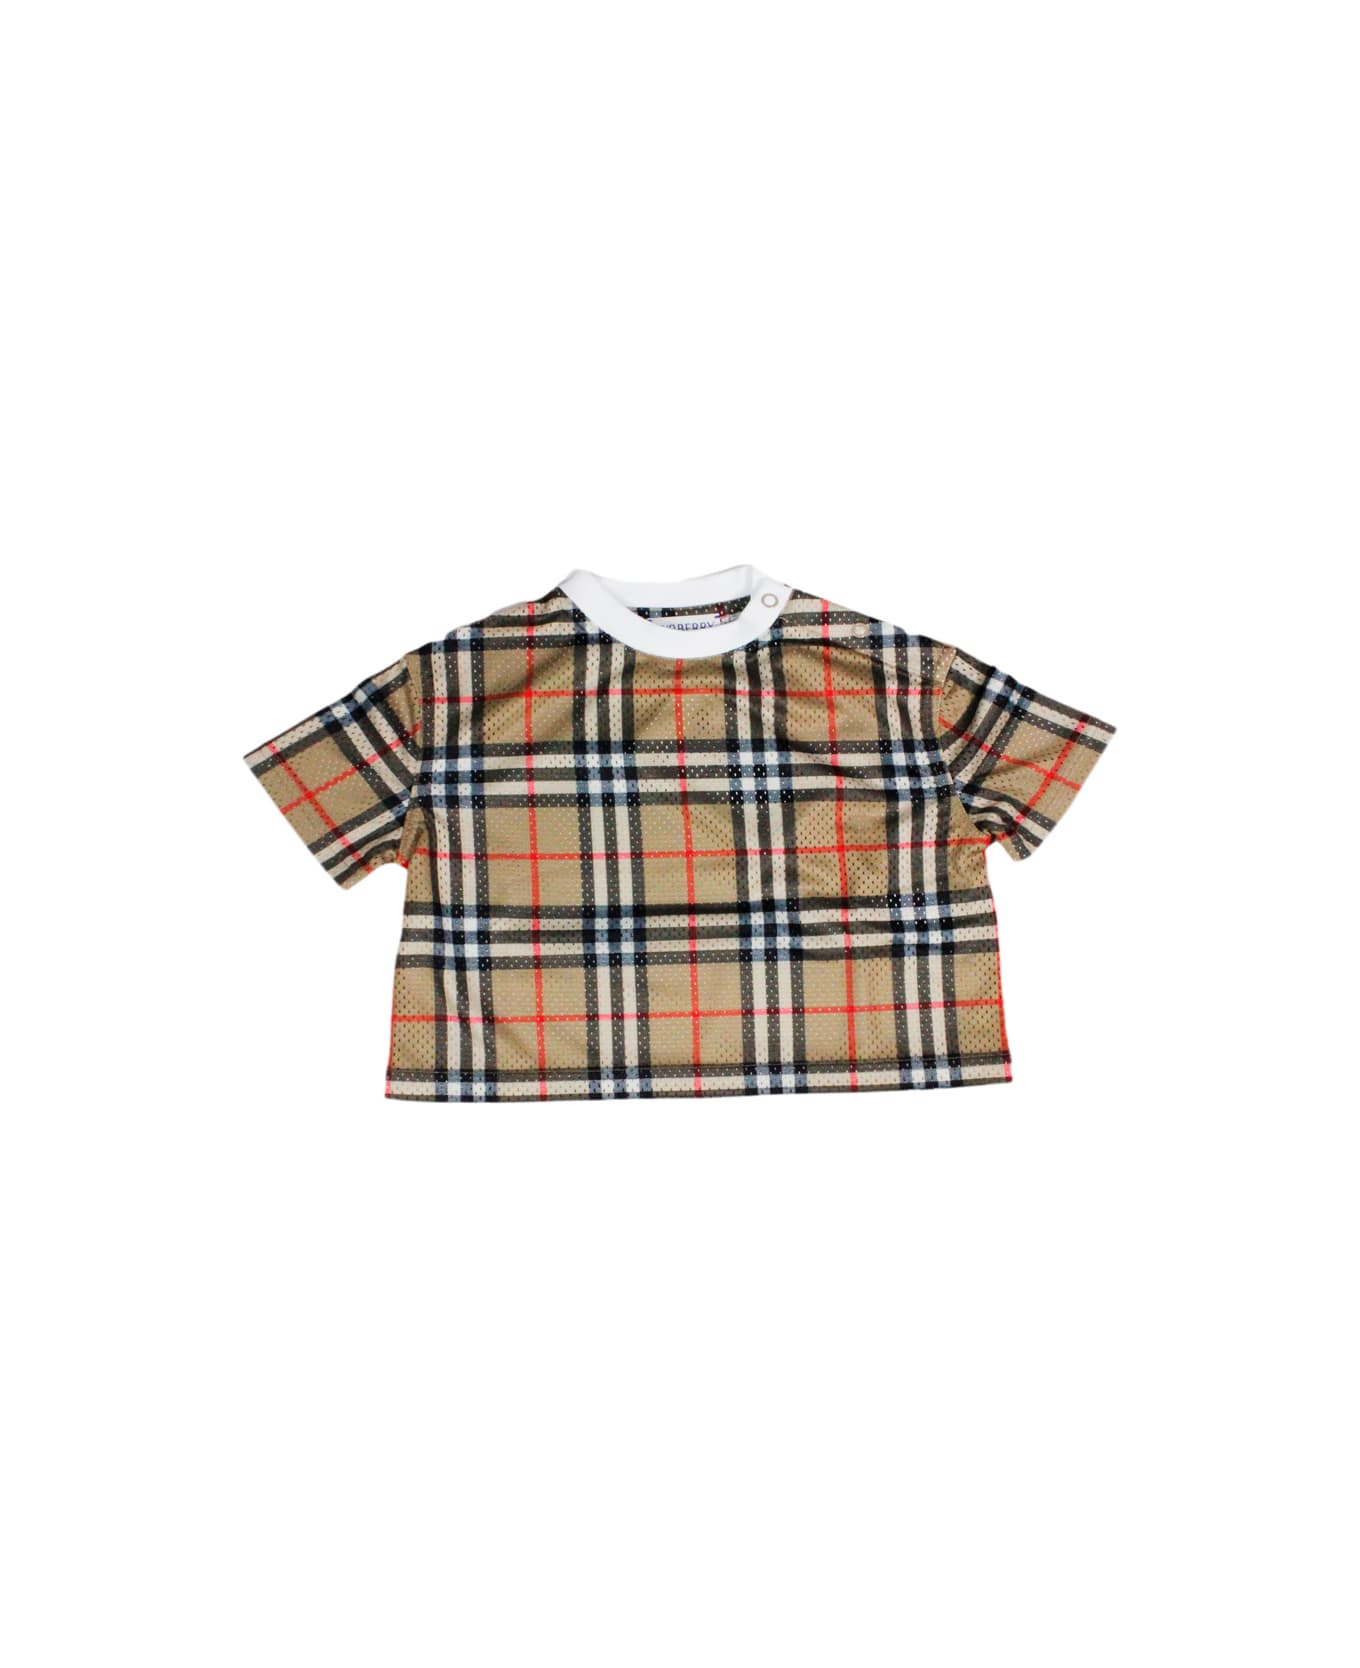 Burberry Crew-neck, Short-sleeved T-shirt In Perforated Fabric With Check Pattern And Small Buttons On The Shoulder. - Beige